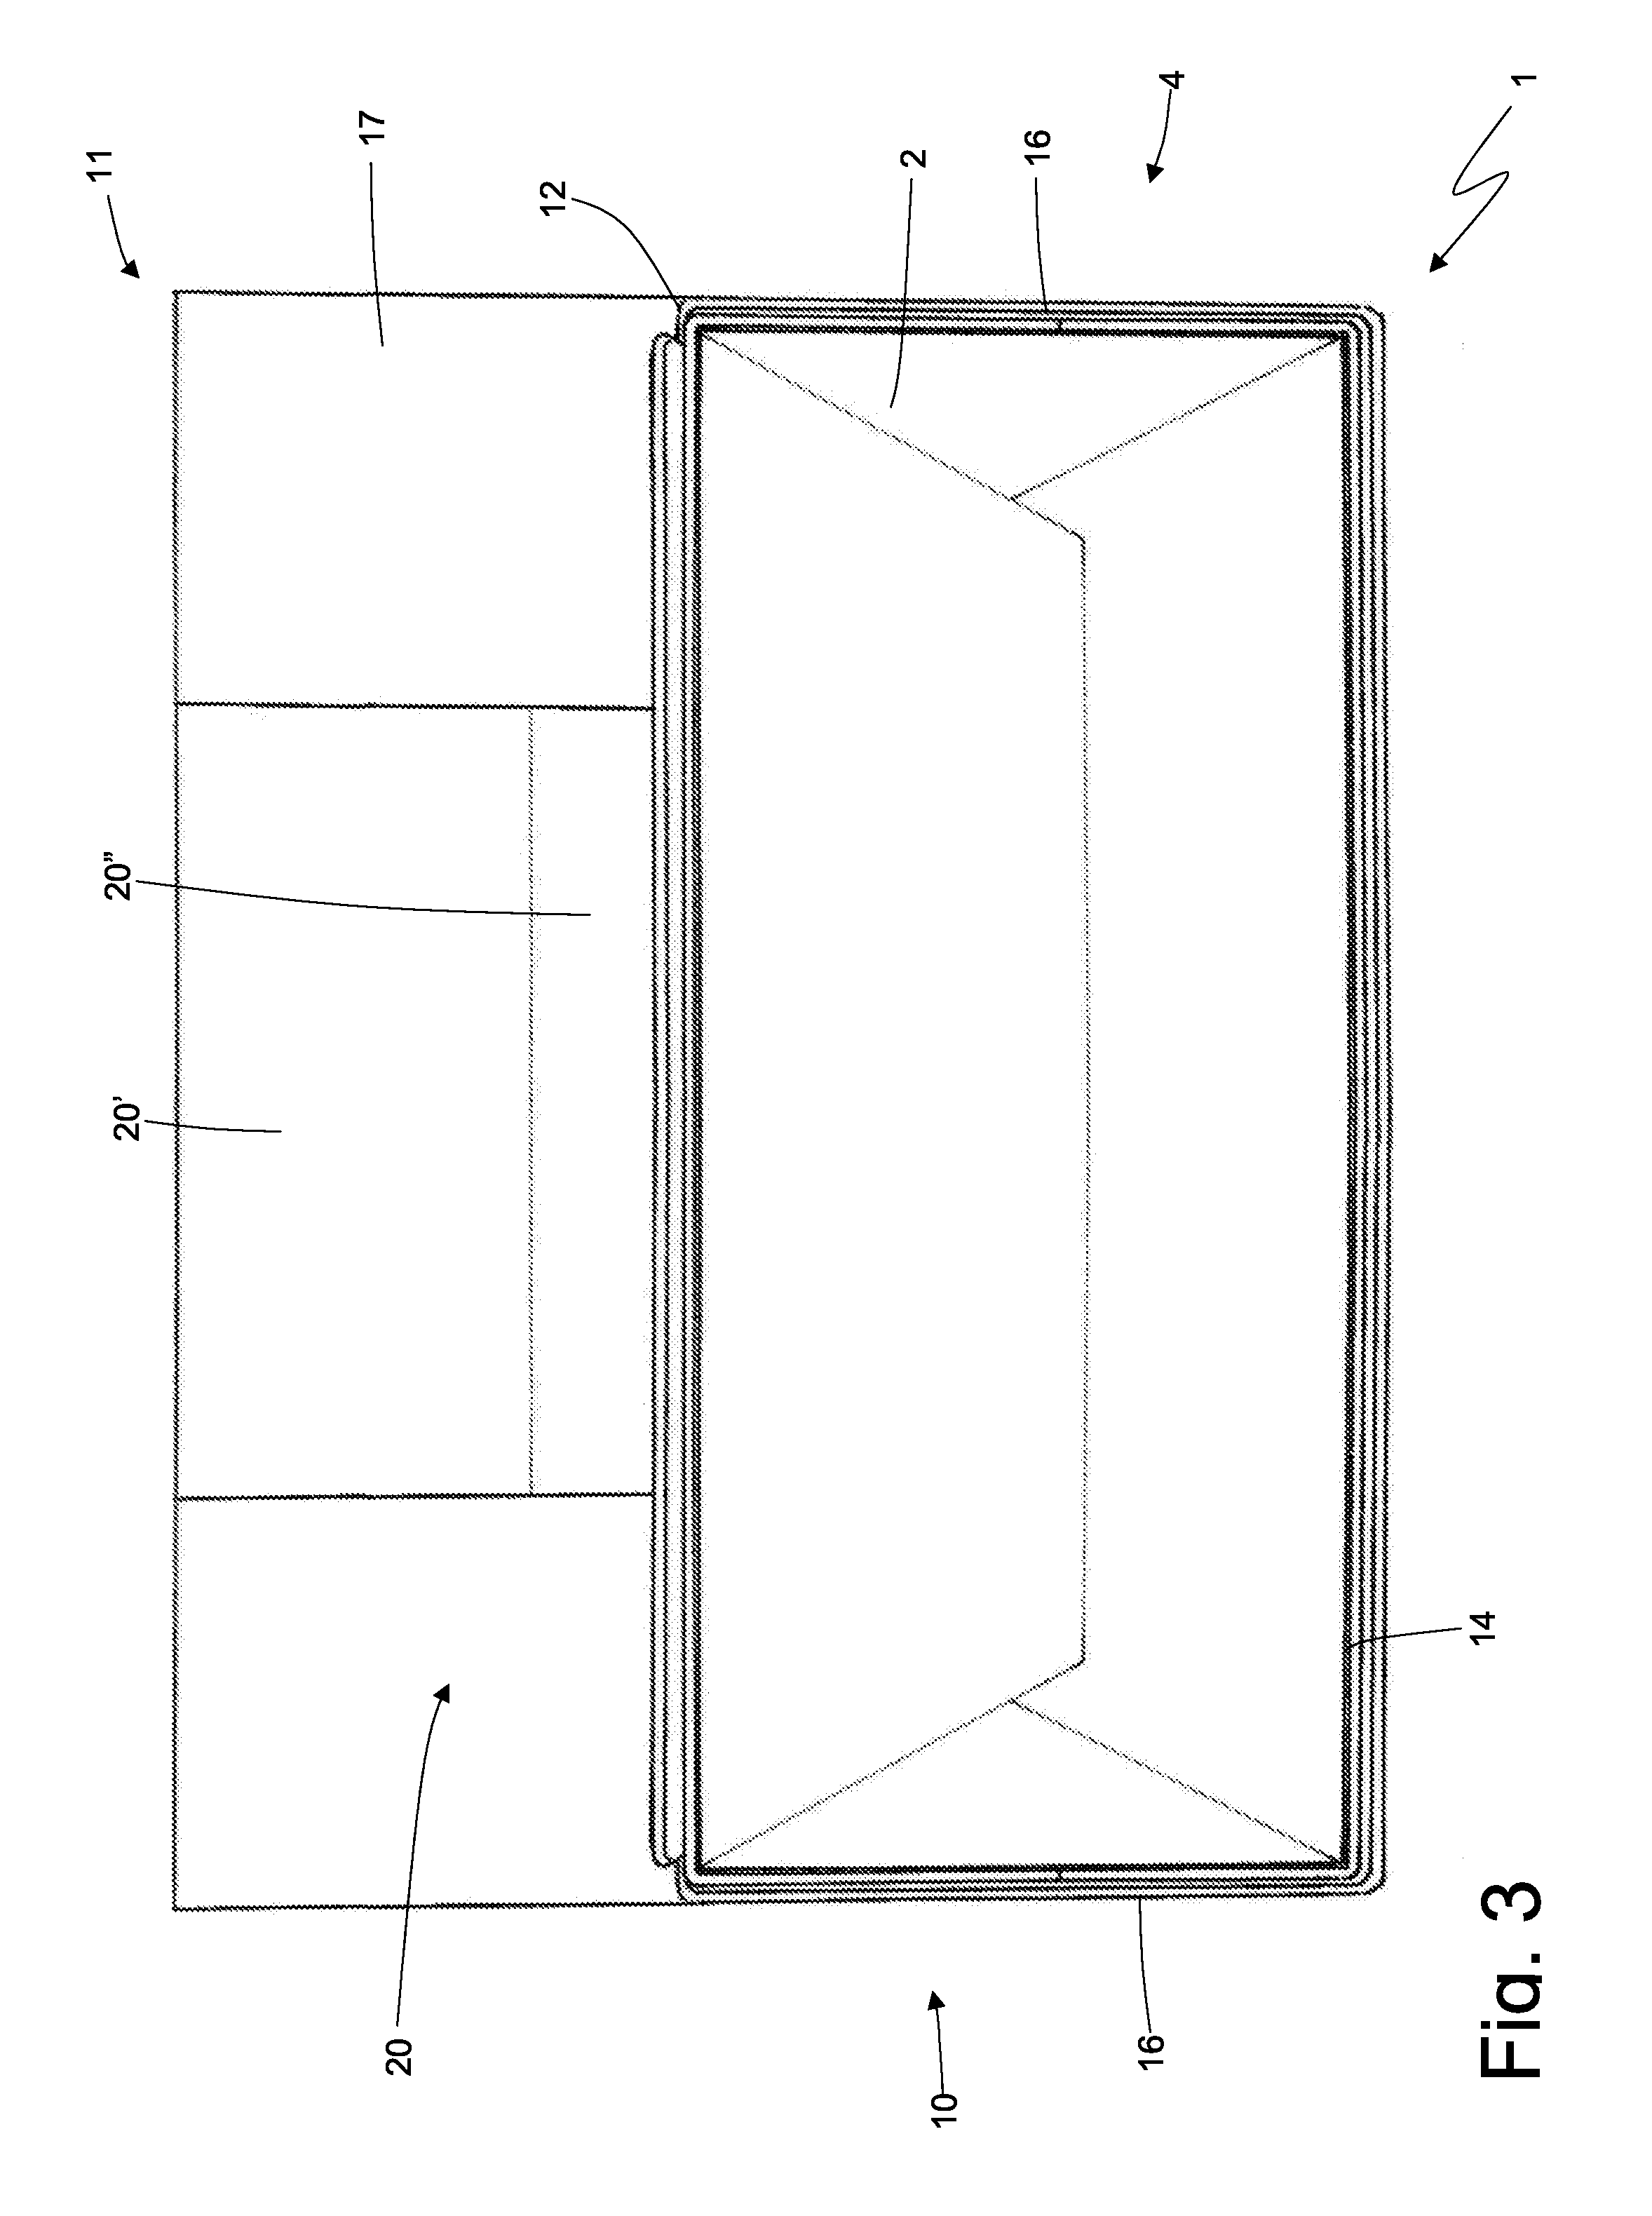 Processing method and unit for automatically opening a hinged-lid slide-open package of tobacco products